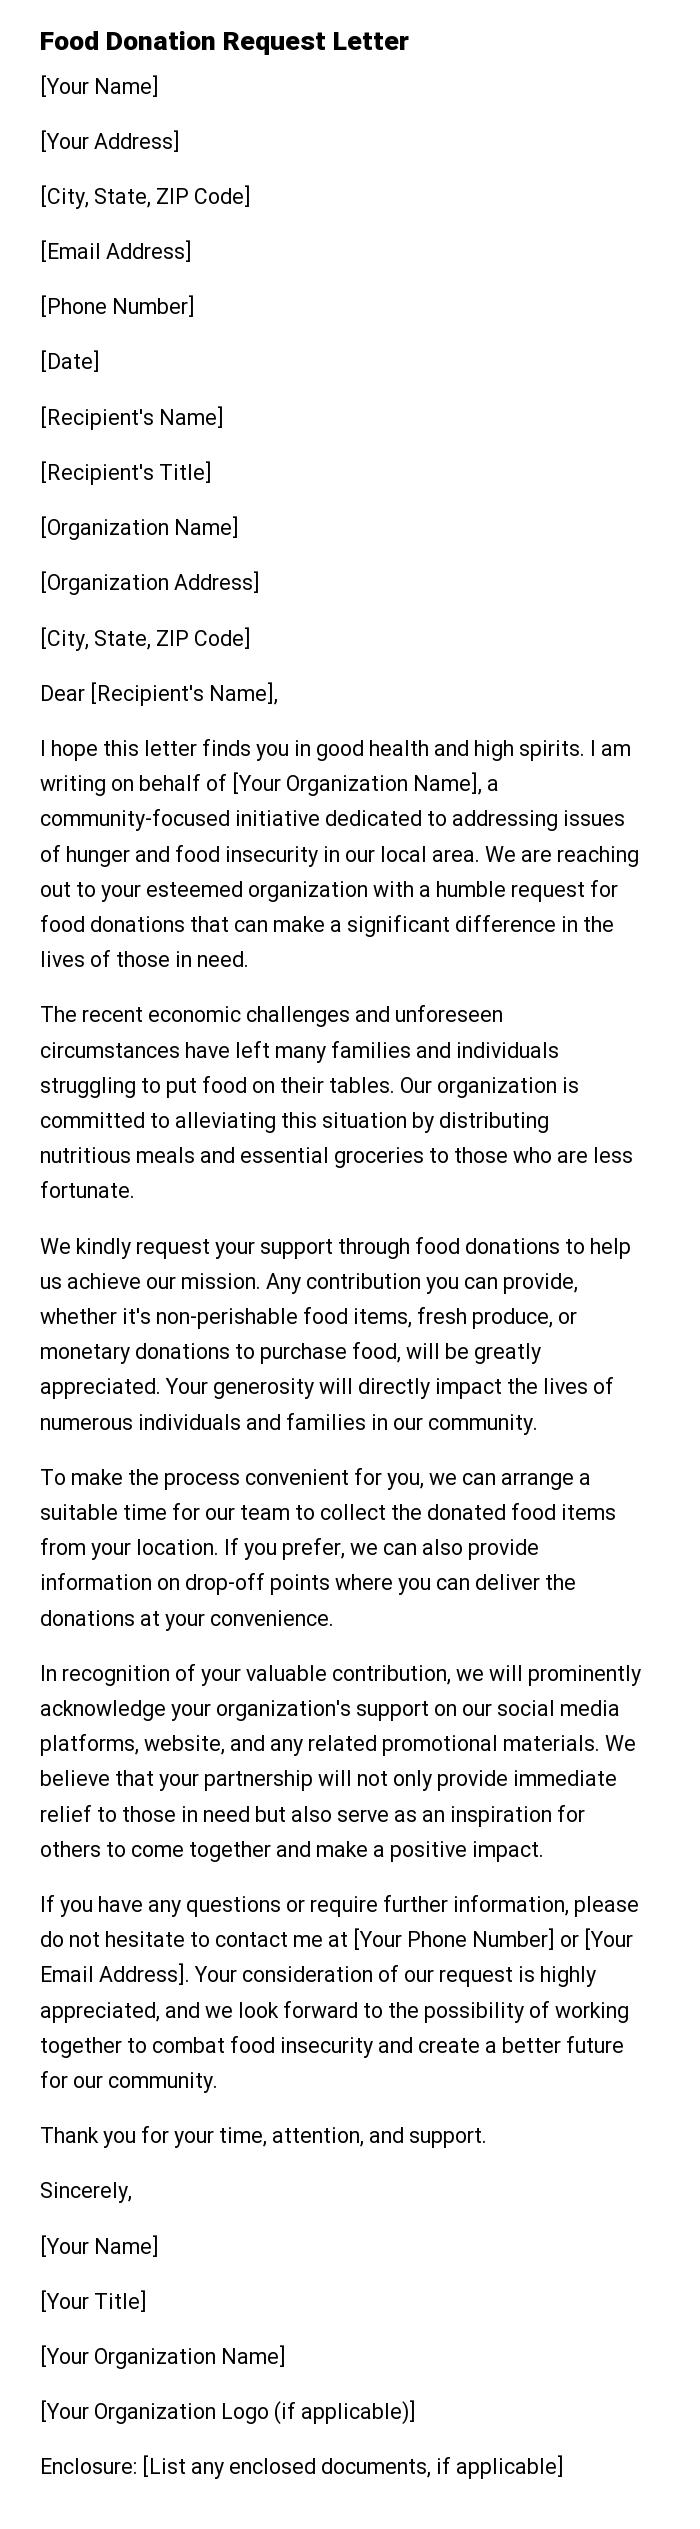 Food Donation Request Letter